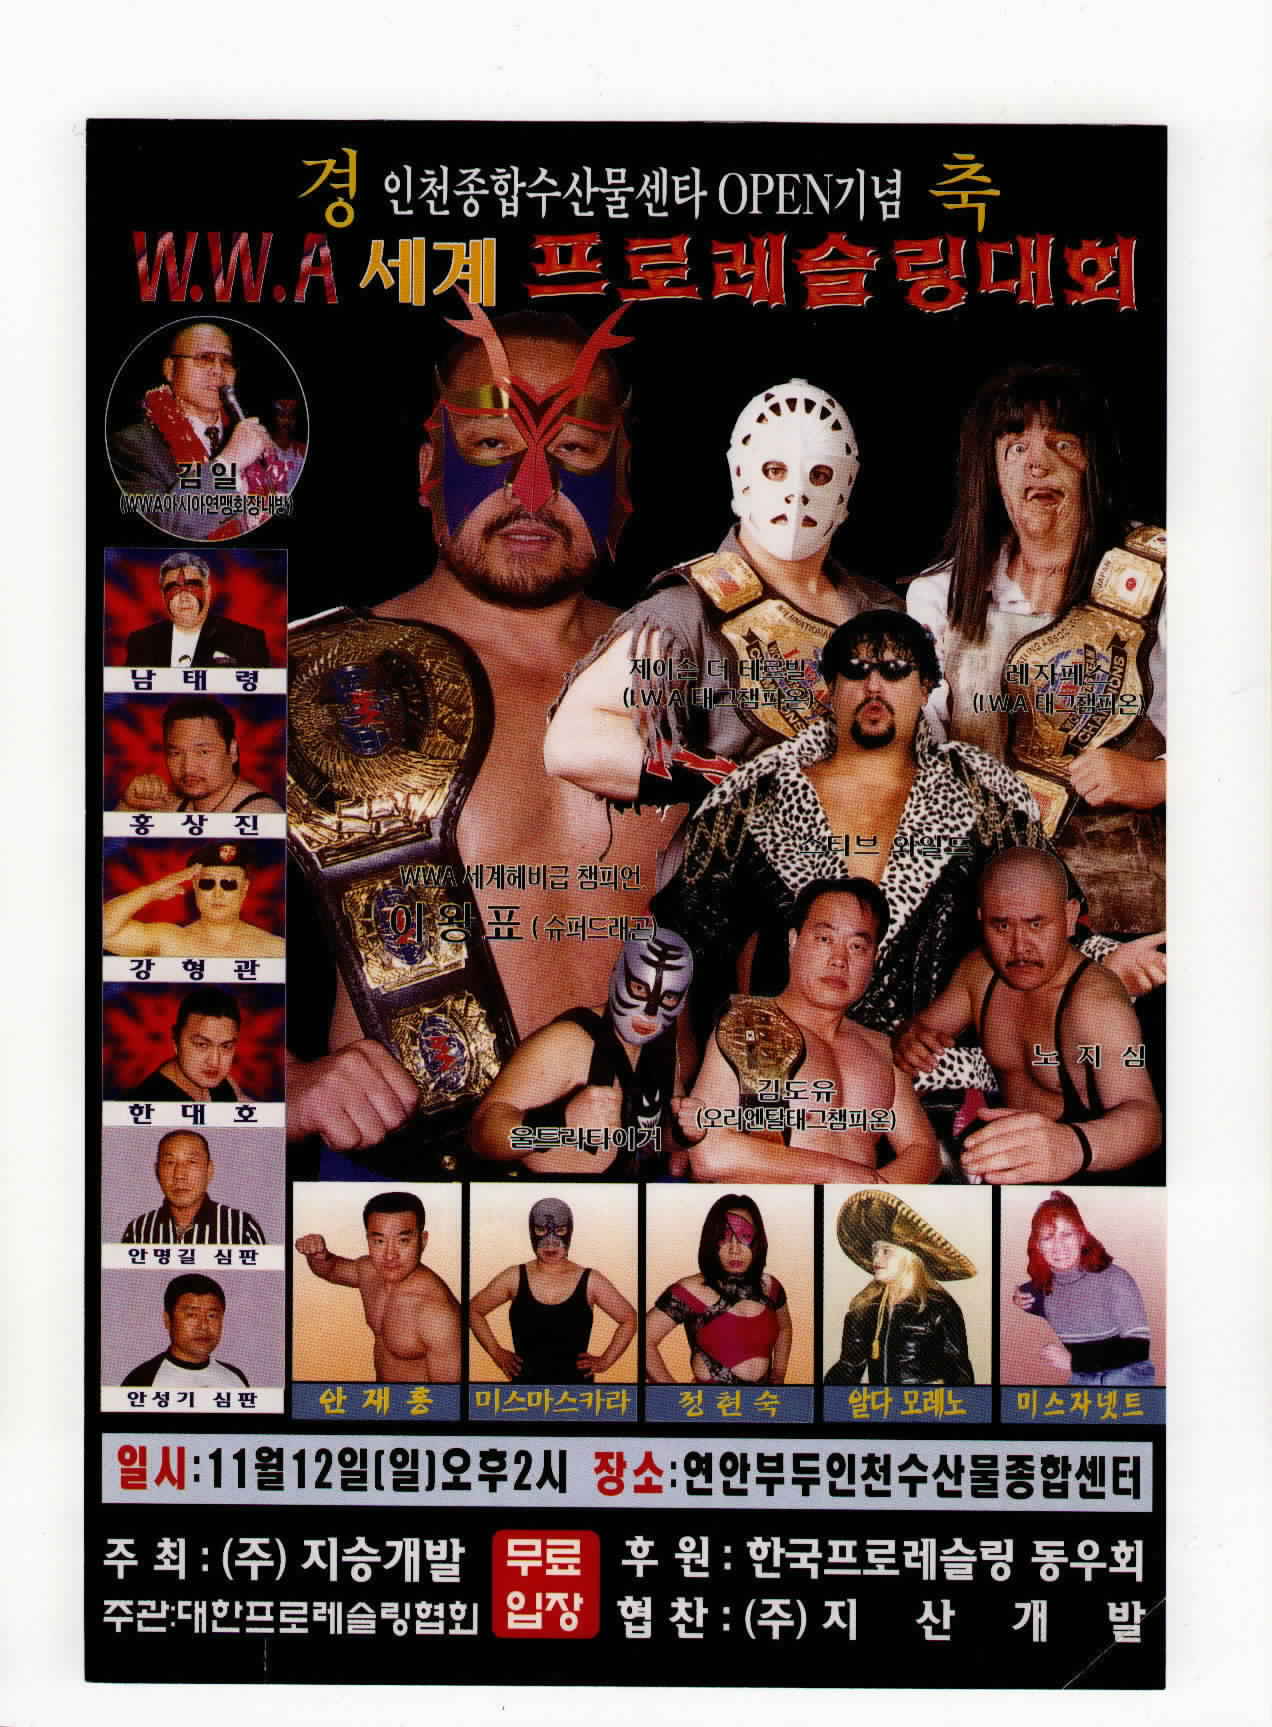 Wrestling Poster from South Korea Featuring Steve Wilde.